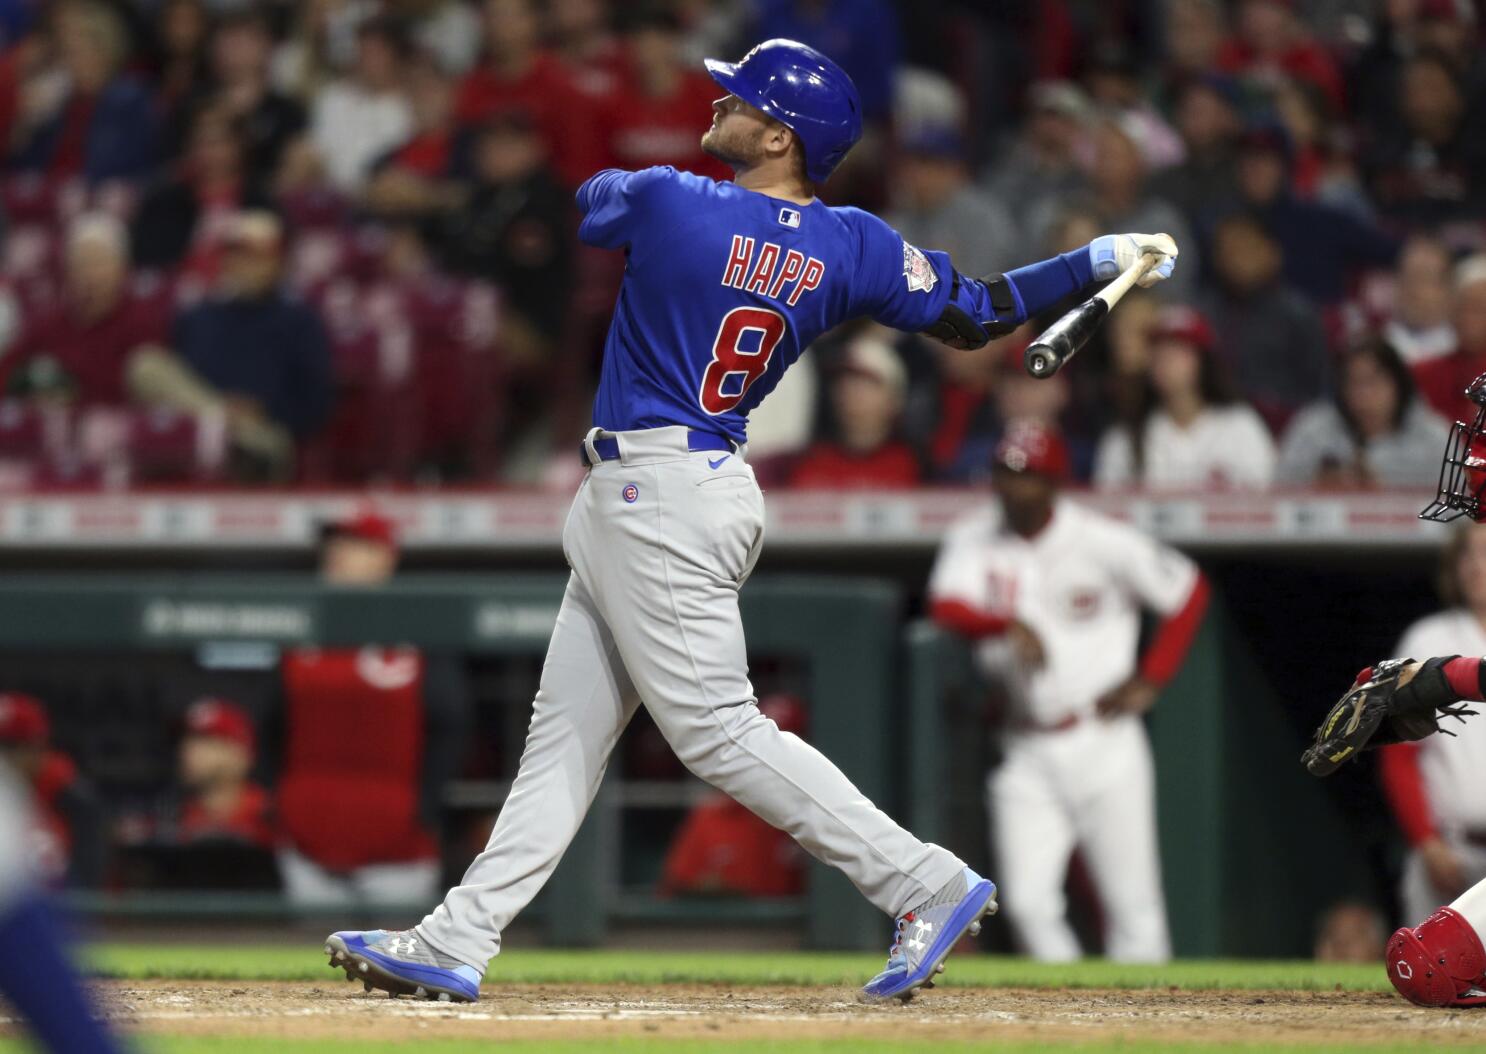 Chicago Cubs: How did they fare in the All-Star Game?